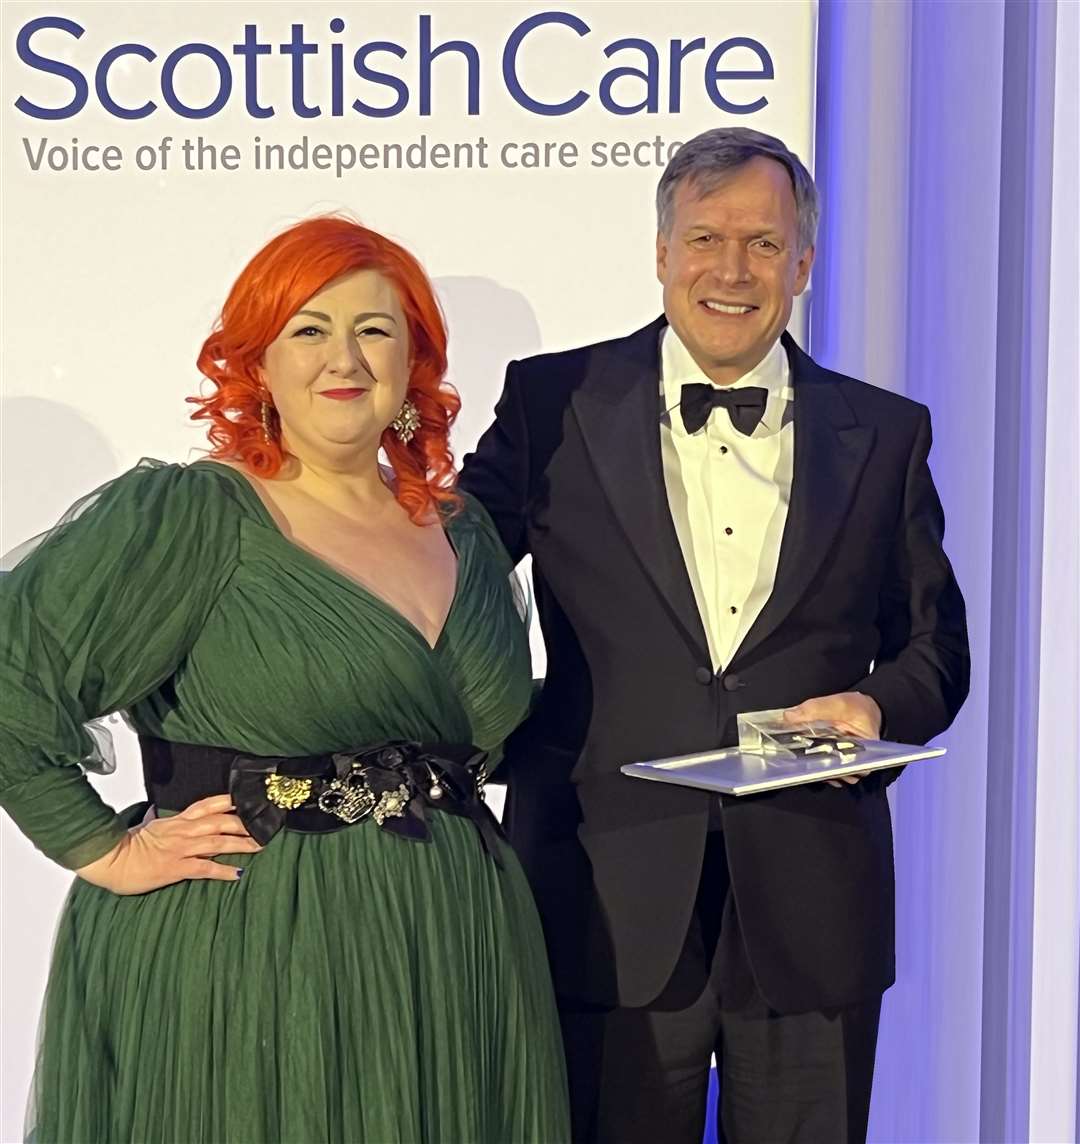 Ron Taylor receives the award from singer Michelle McManus.